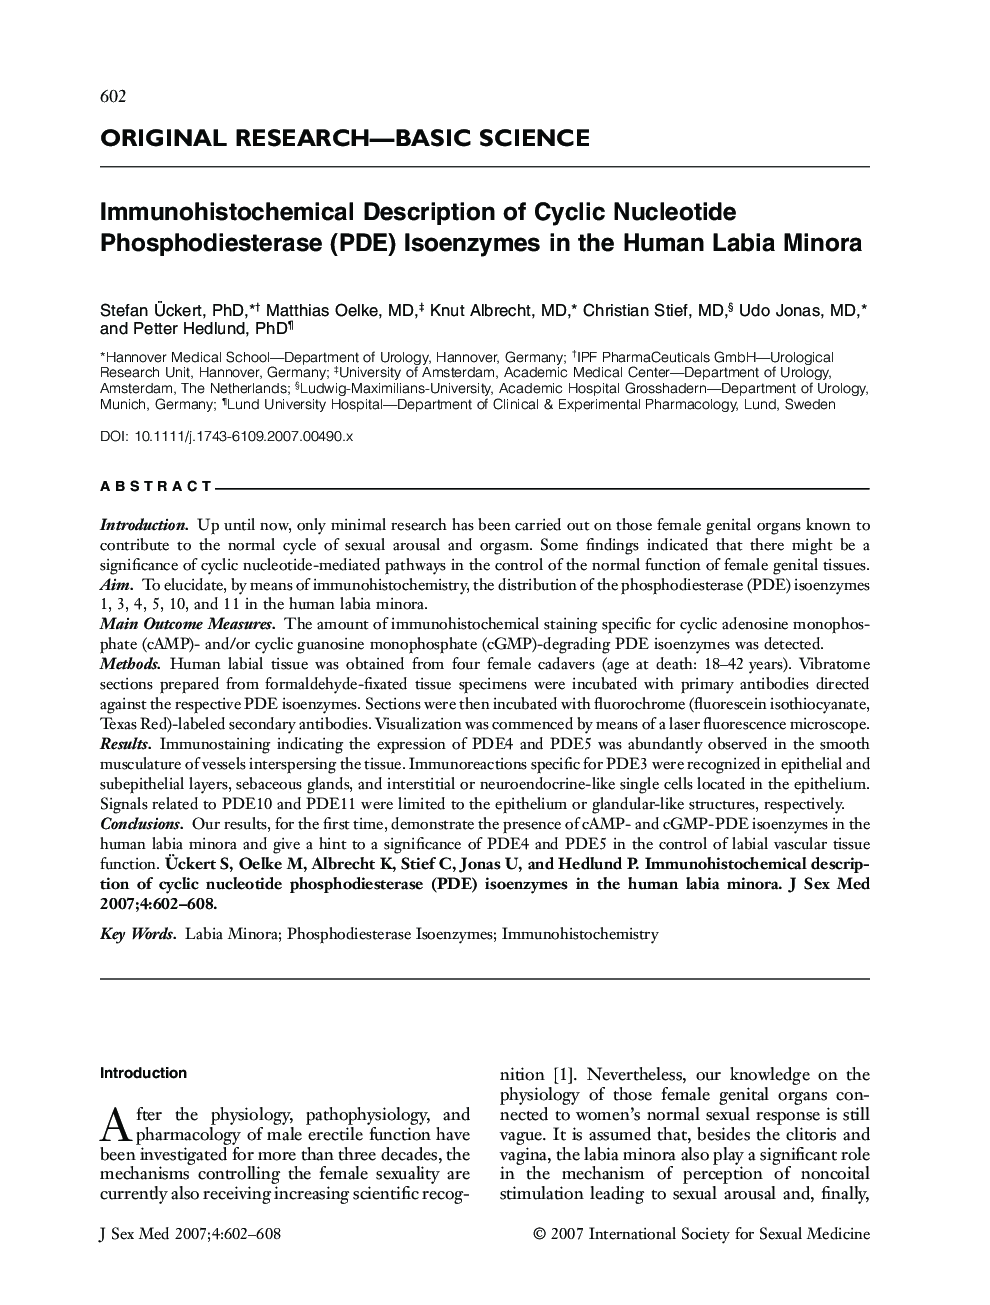 ORIGINAL RESEARCH-BASIC SCIENCE: Immunohistochemical Description of Cyclic Nucleotide Phosphodiesterase (PDE) Isoenzymes in the Human Labia Minora